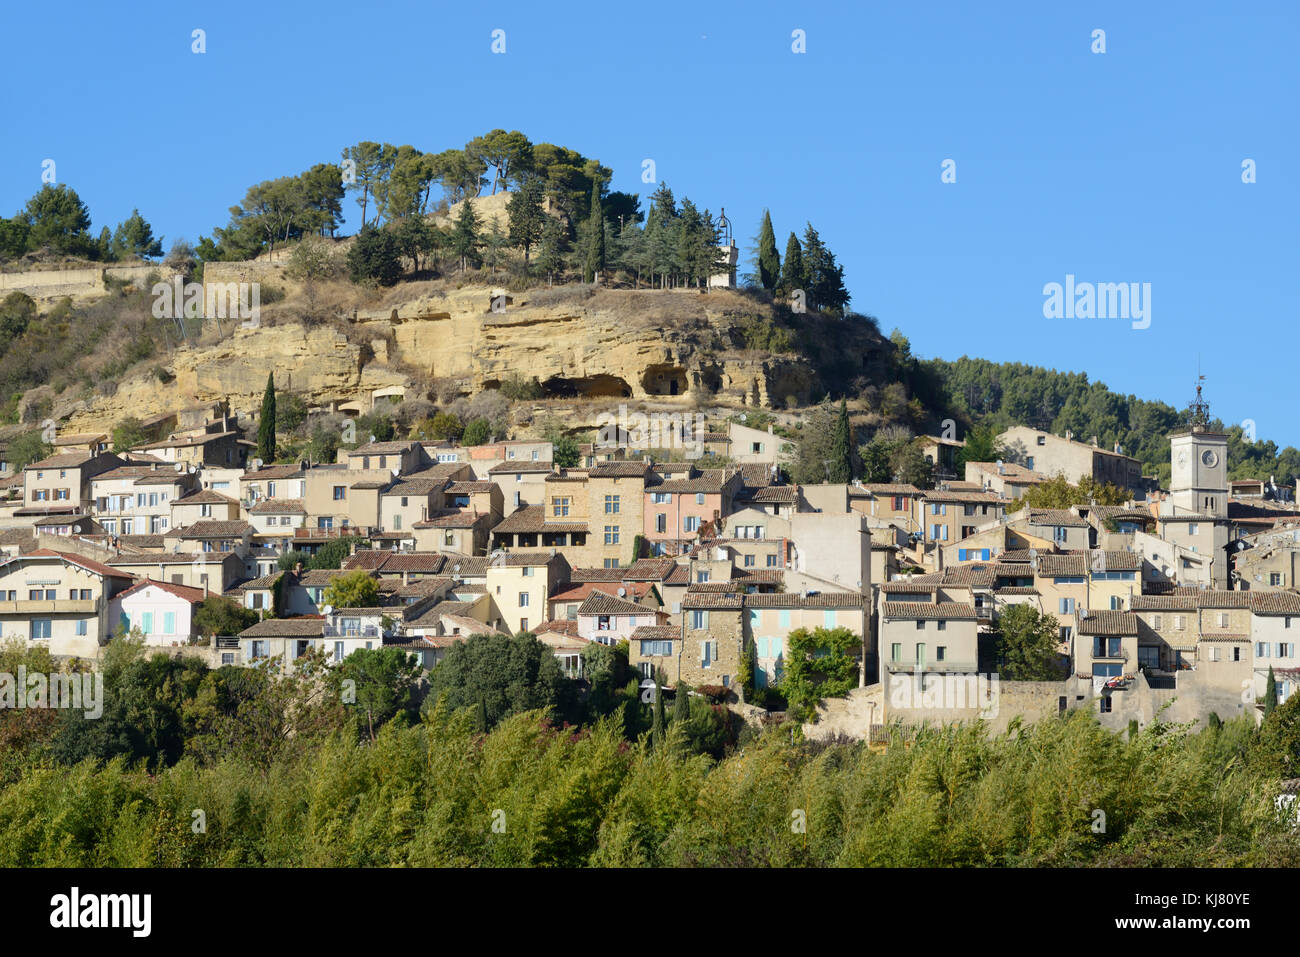 View of the Village of Cadenet and its Ruined Castle Mound in the Luberon Regional Park, Vaucluse, Provence, France Stock Photo